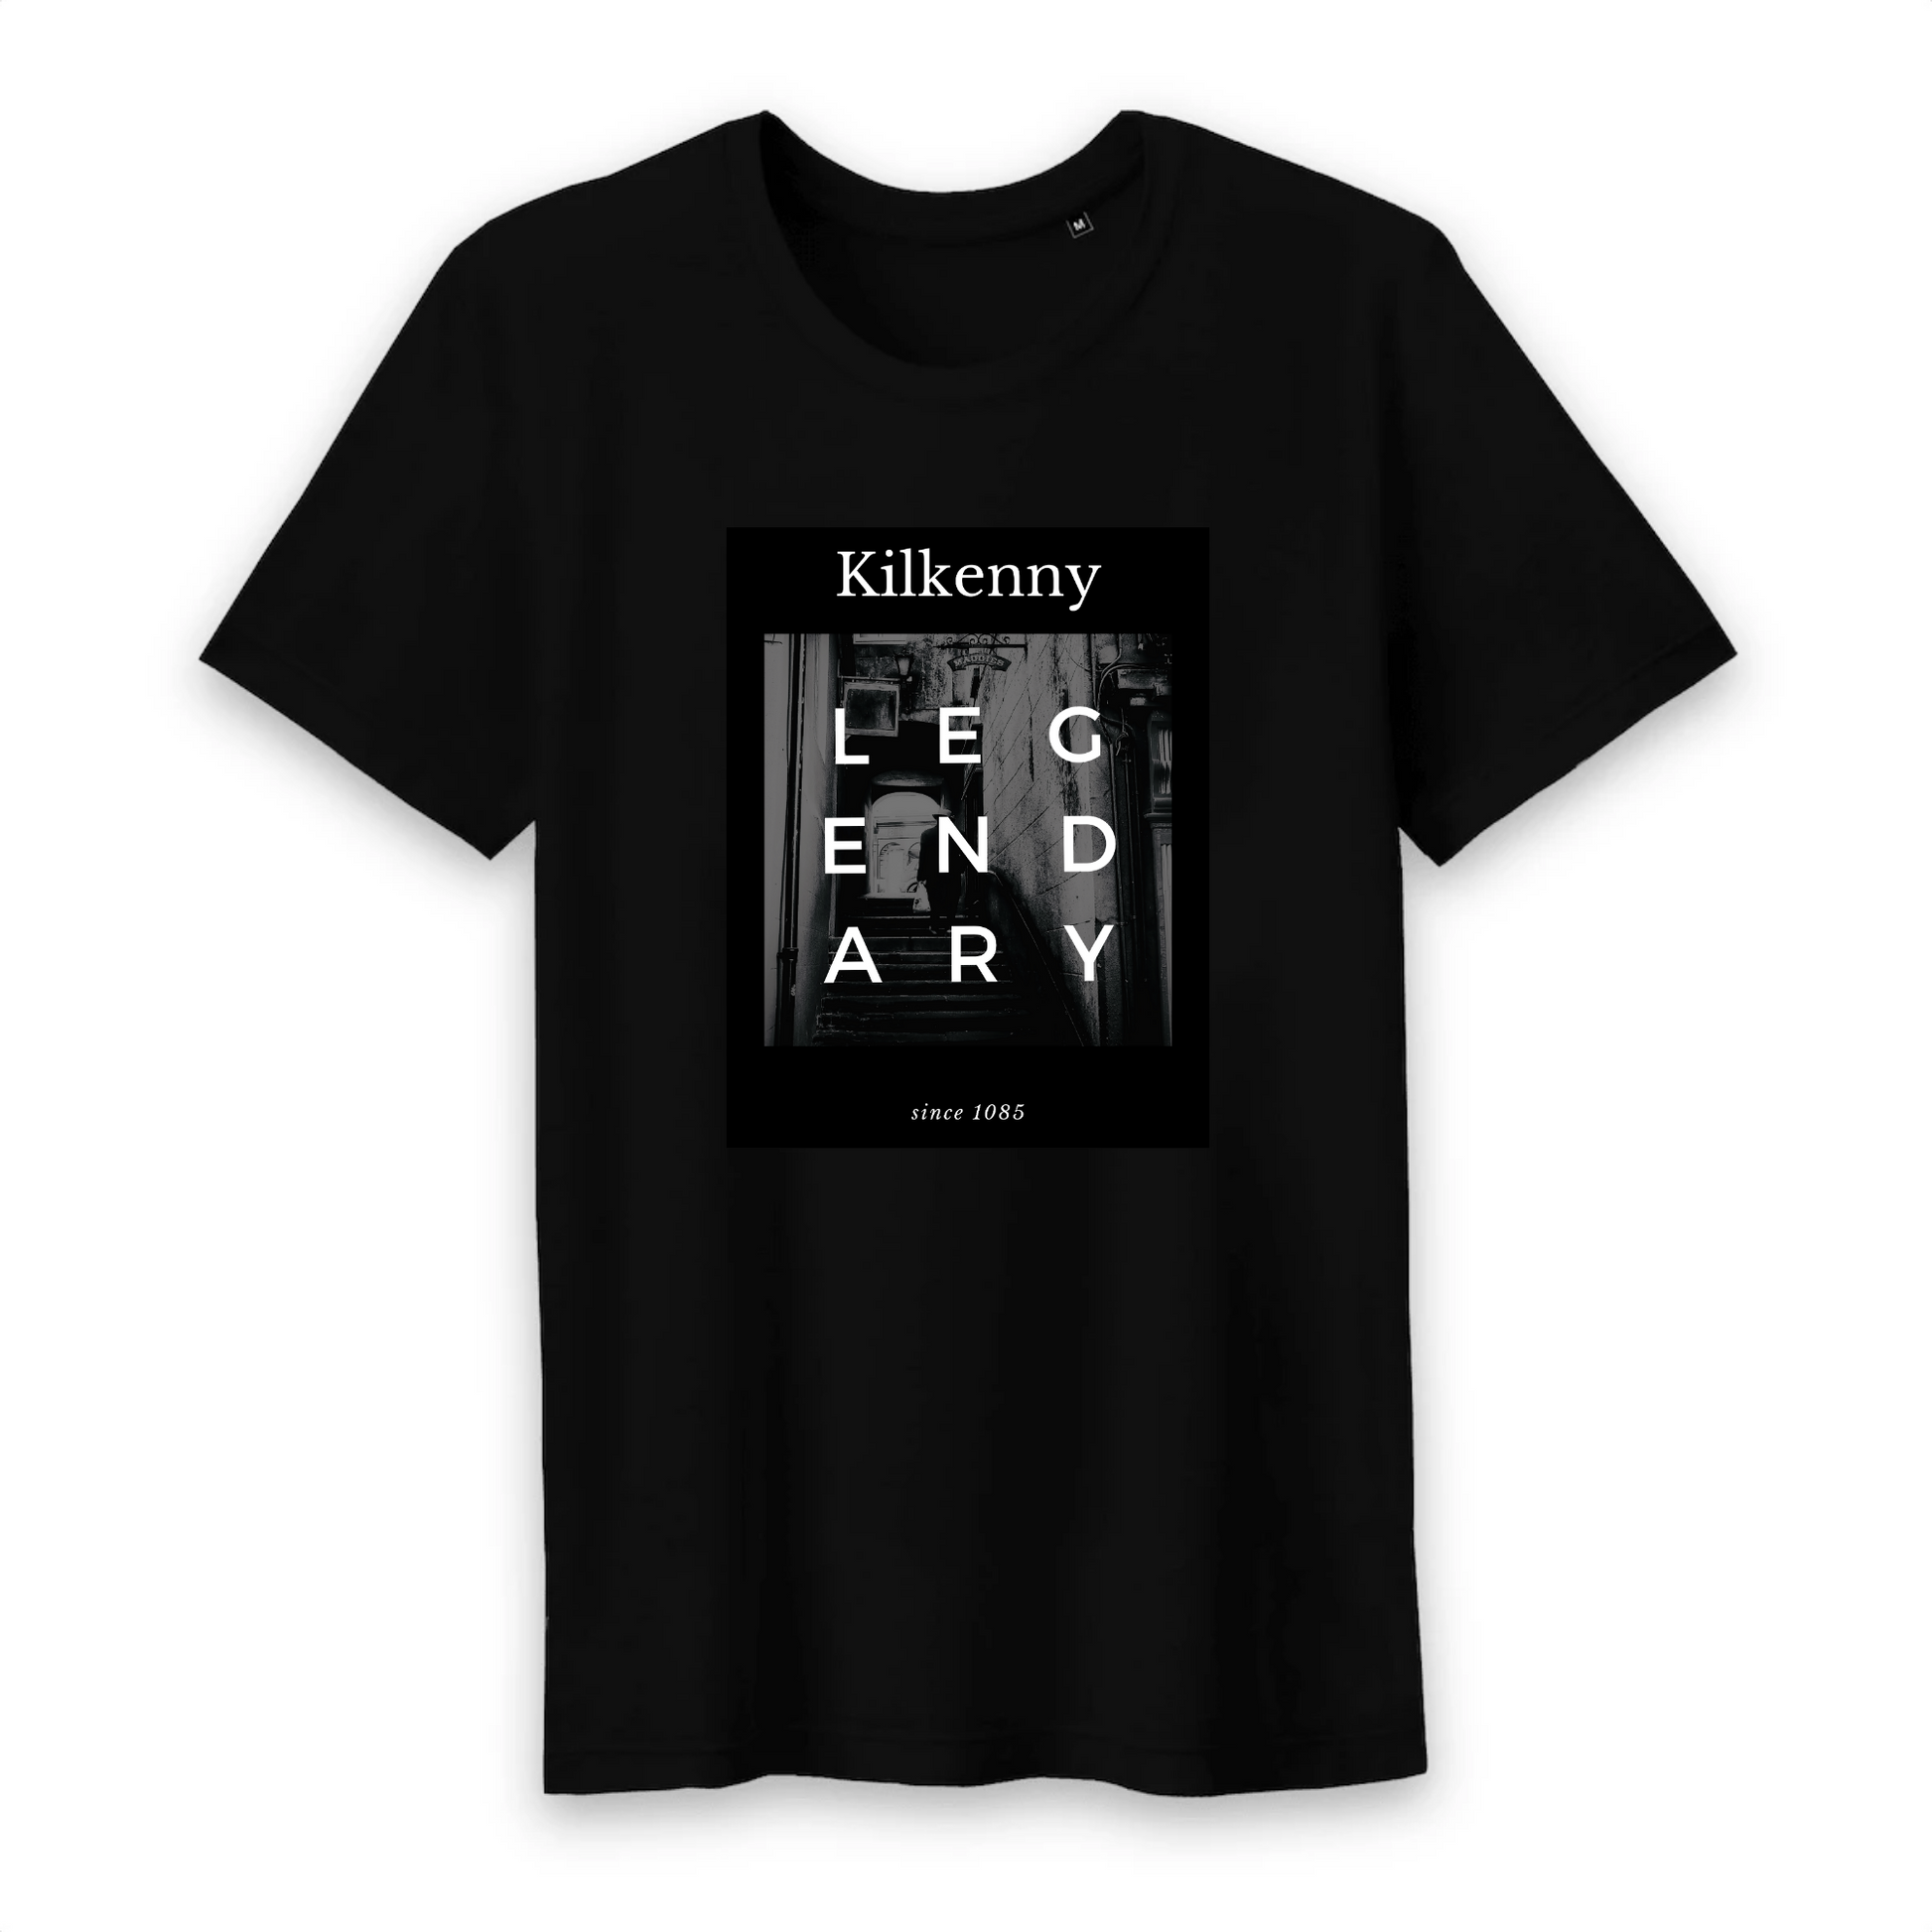 Kilkenny Legendary Market Slip T-Shirt - Designed by T-Pop Available to Buy at a Discounted Price on Moon Behind The Hill Online Designer Discount Store